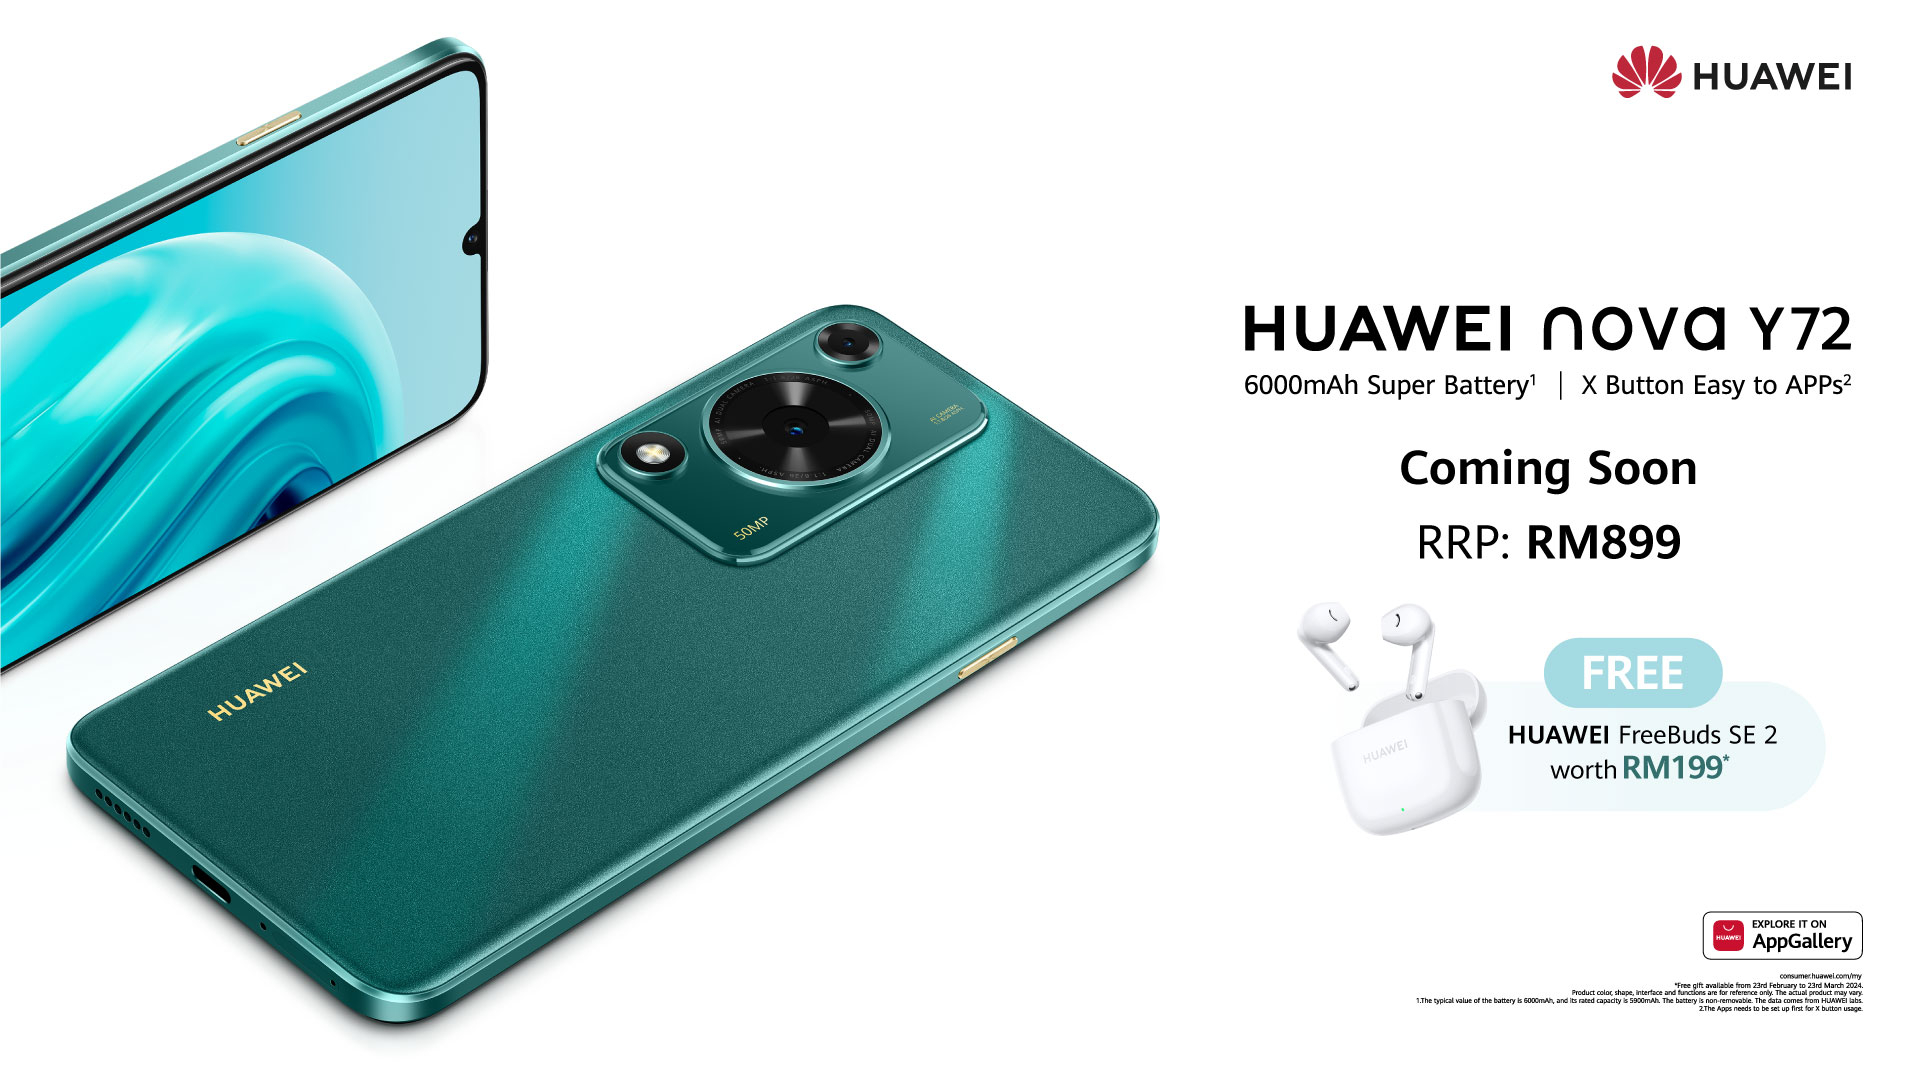 The Huawei nova Y72 Boasts a 6000mAh Battery and an ‘X’ Button for RM899